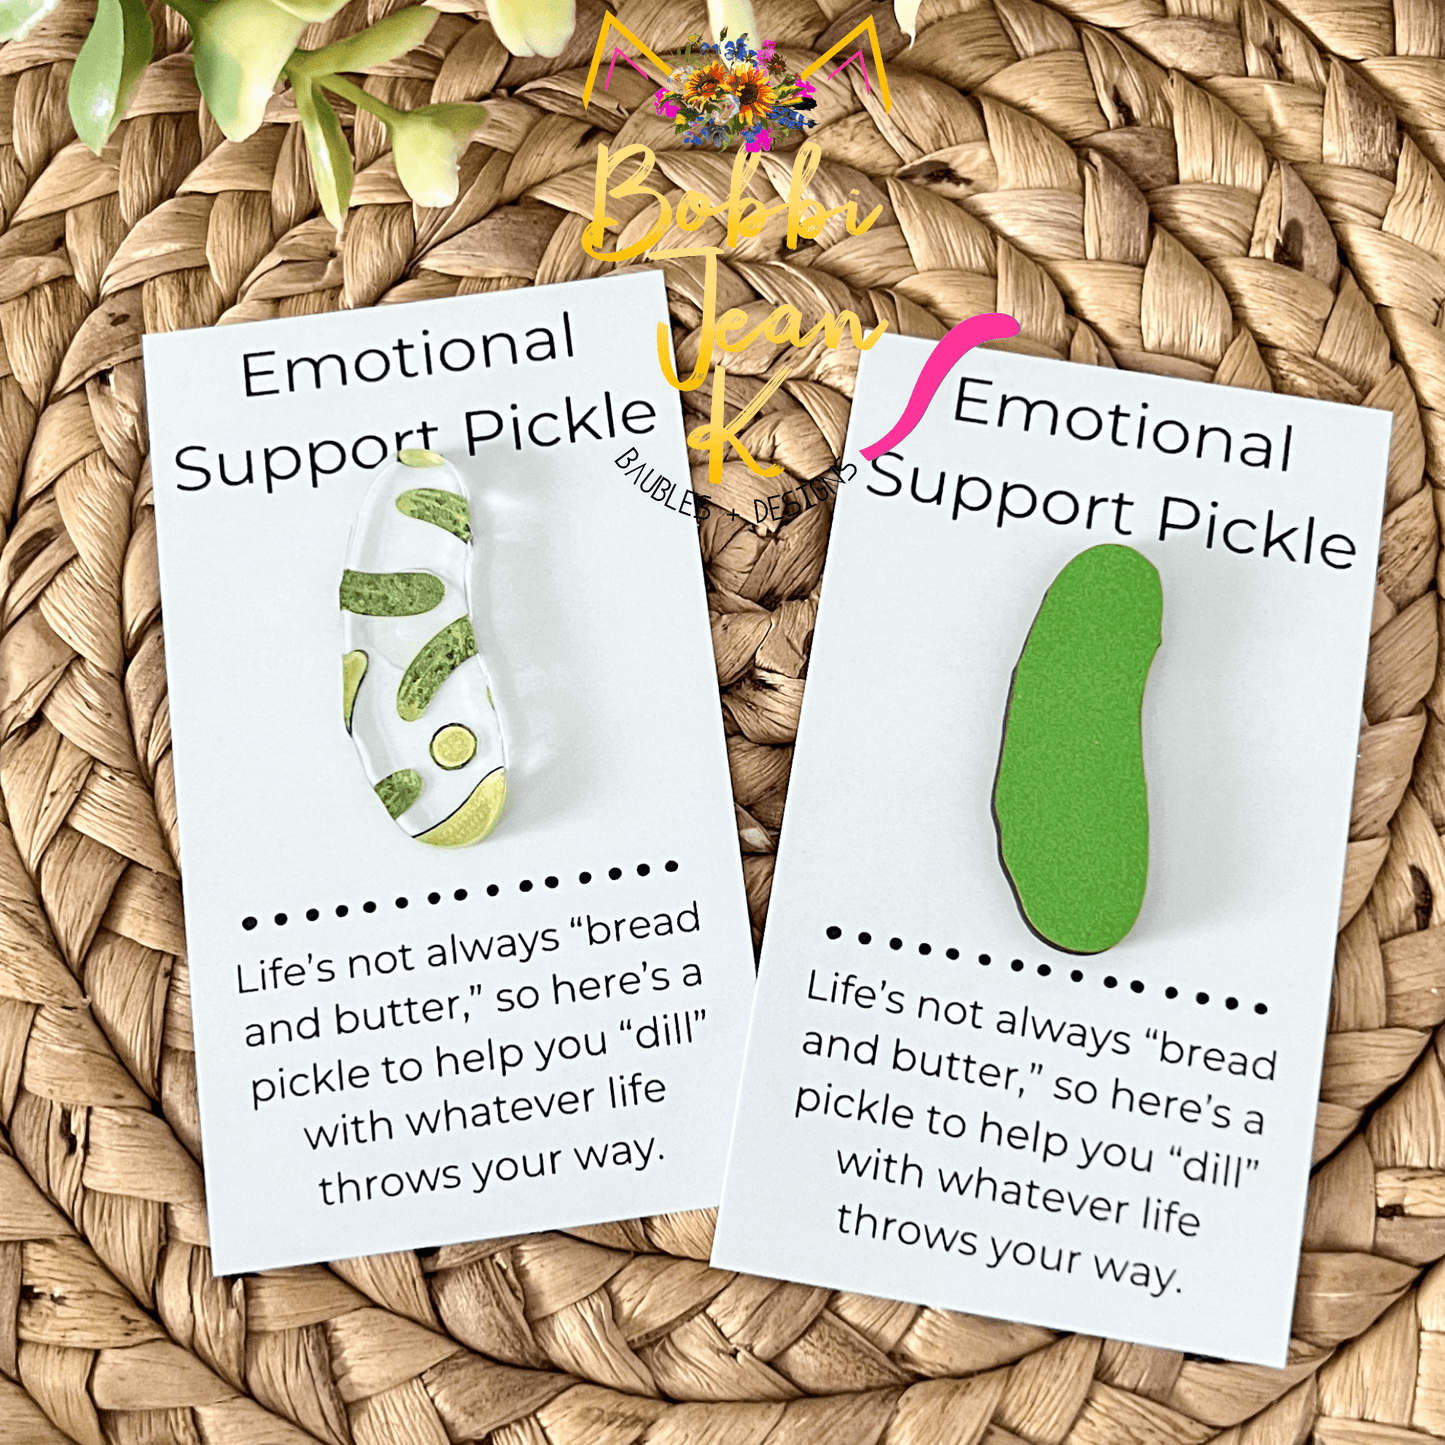 Emotional Support Pickle: Choose From Pattern or Solid